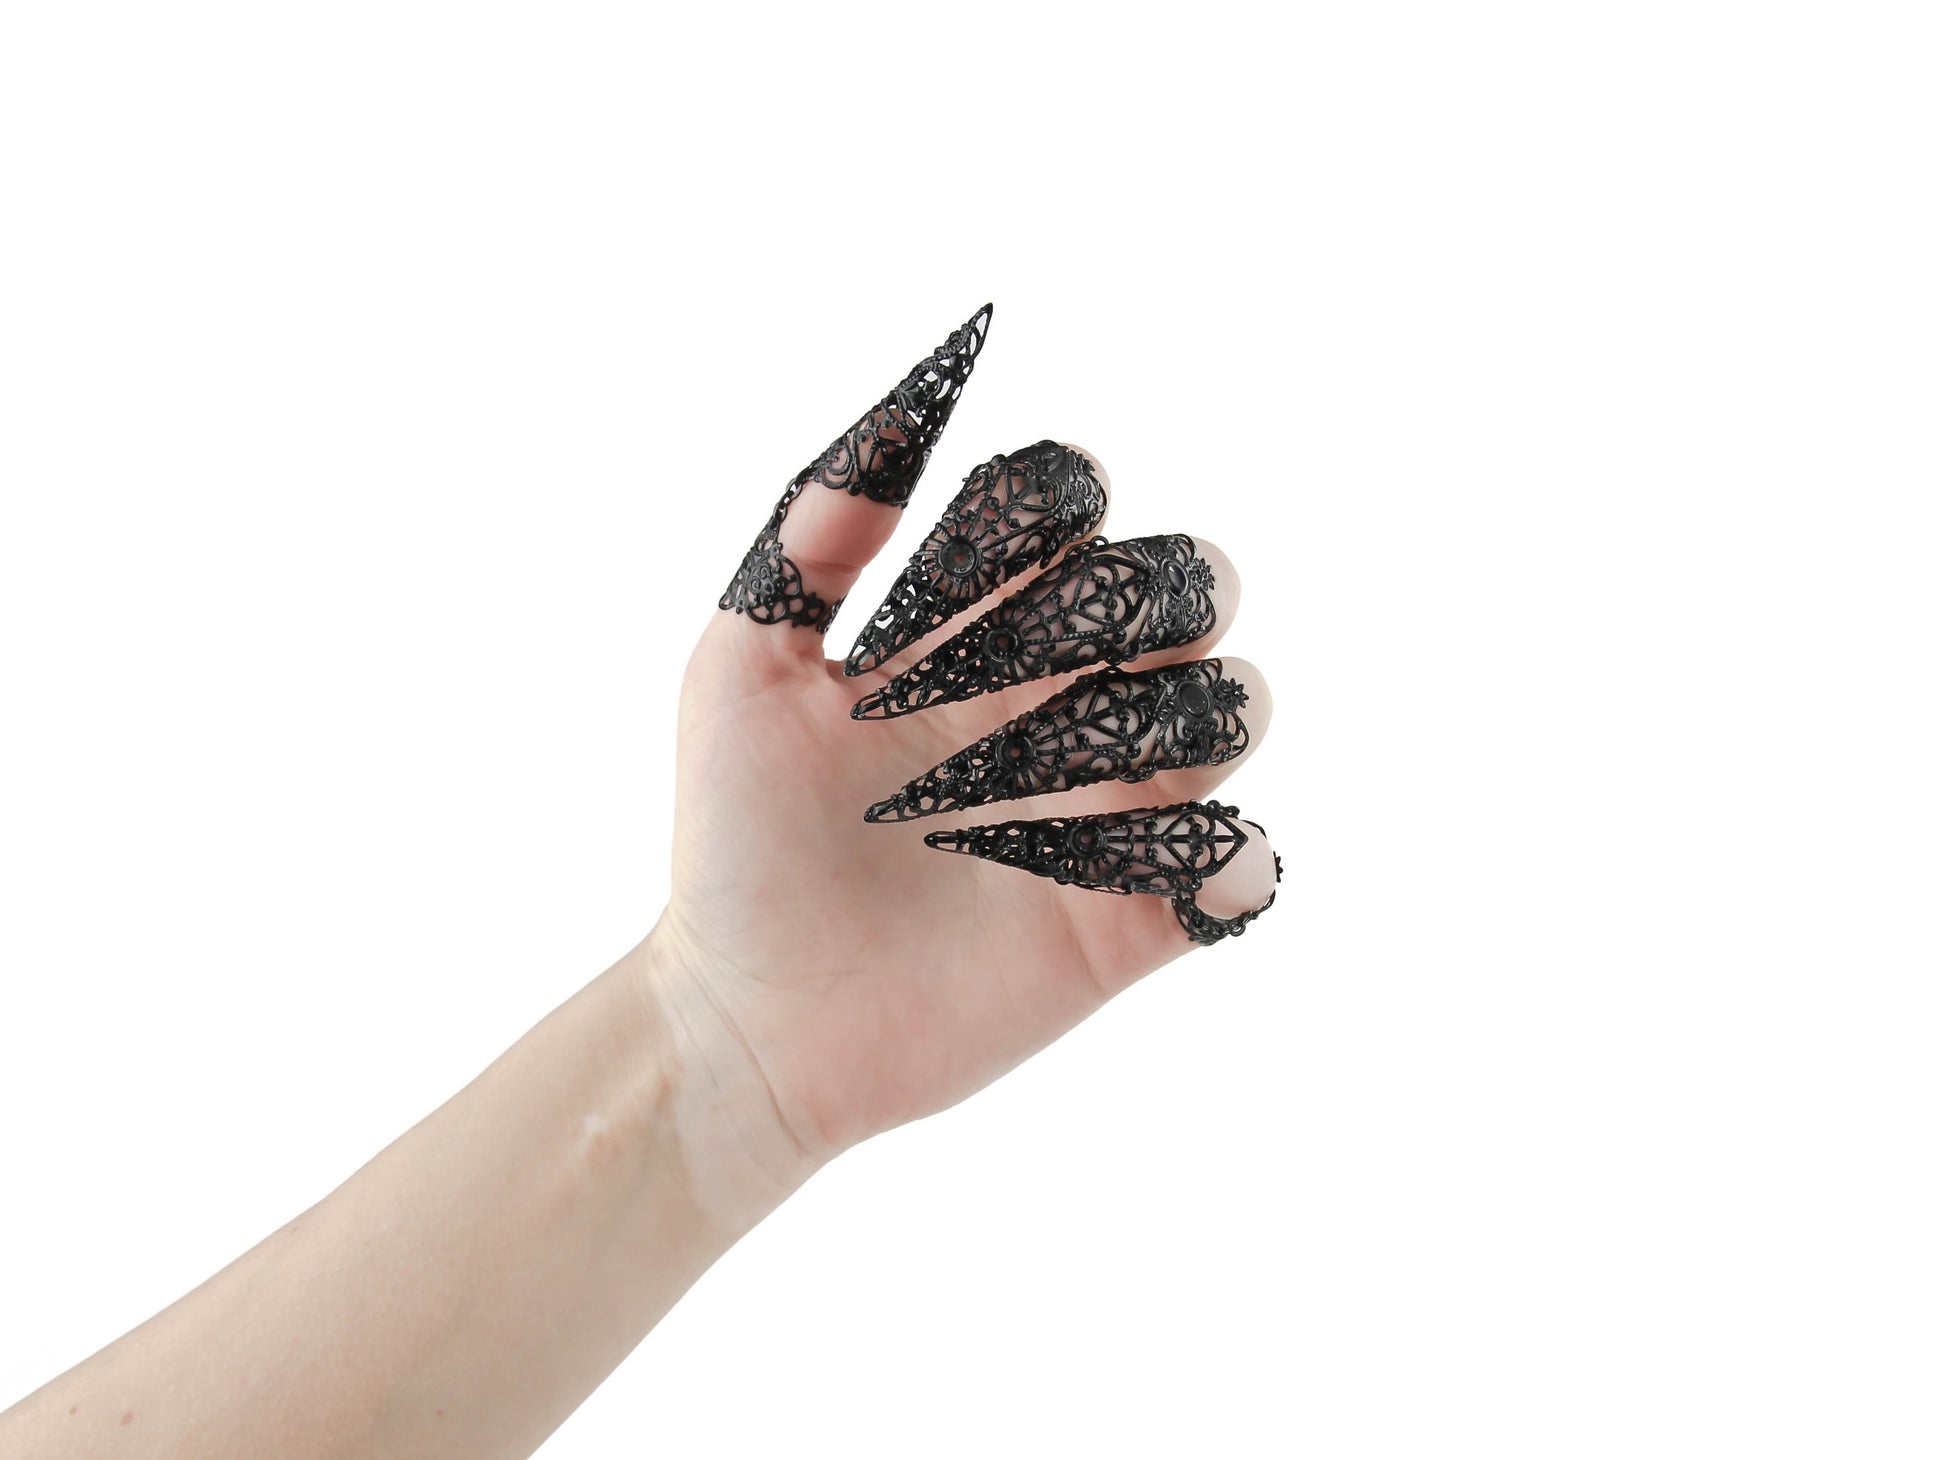 Step into the world of Myril Jewels with this captivating full hand set of midi rings, masterfully designed with claw-like extensions for a bold neo-goth statement. These black rings exude a dark-avantgarde allure, perfect for those who embrace gothic-chic and whimsigoth styles. The intricate detail of each piece makes it an essential accessory for Halloween, while also being versatile enough for everyday wear.